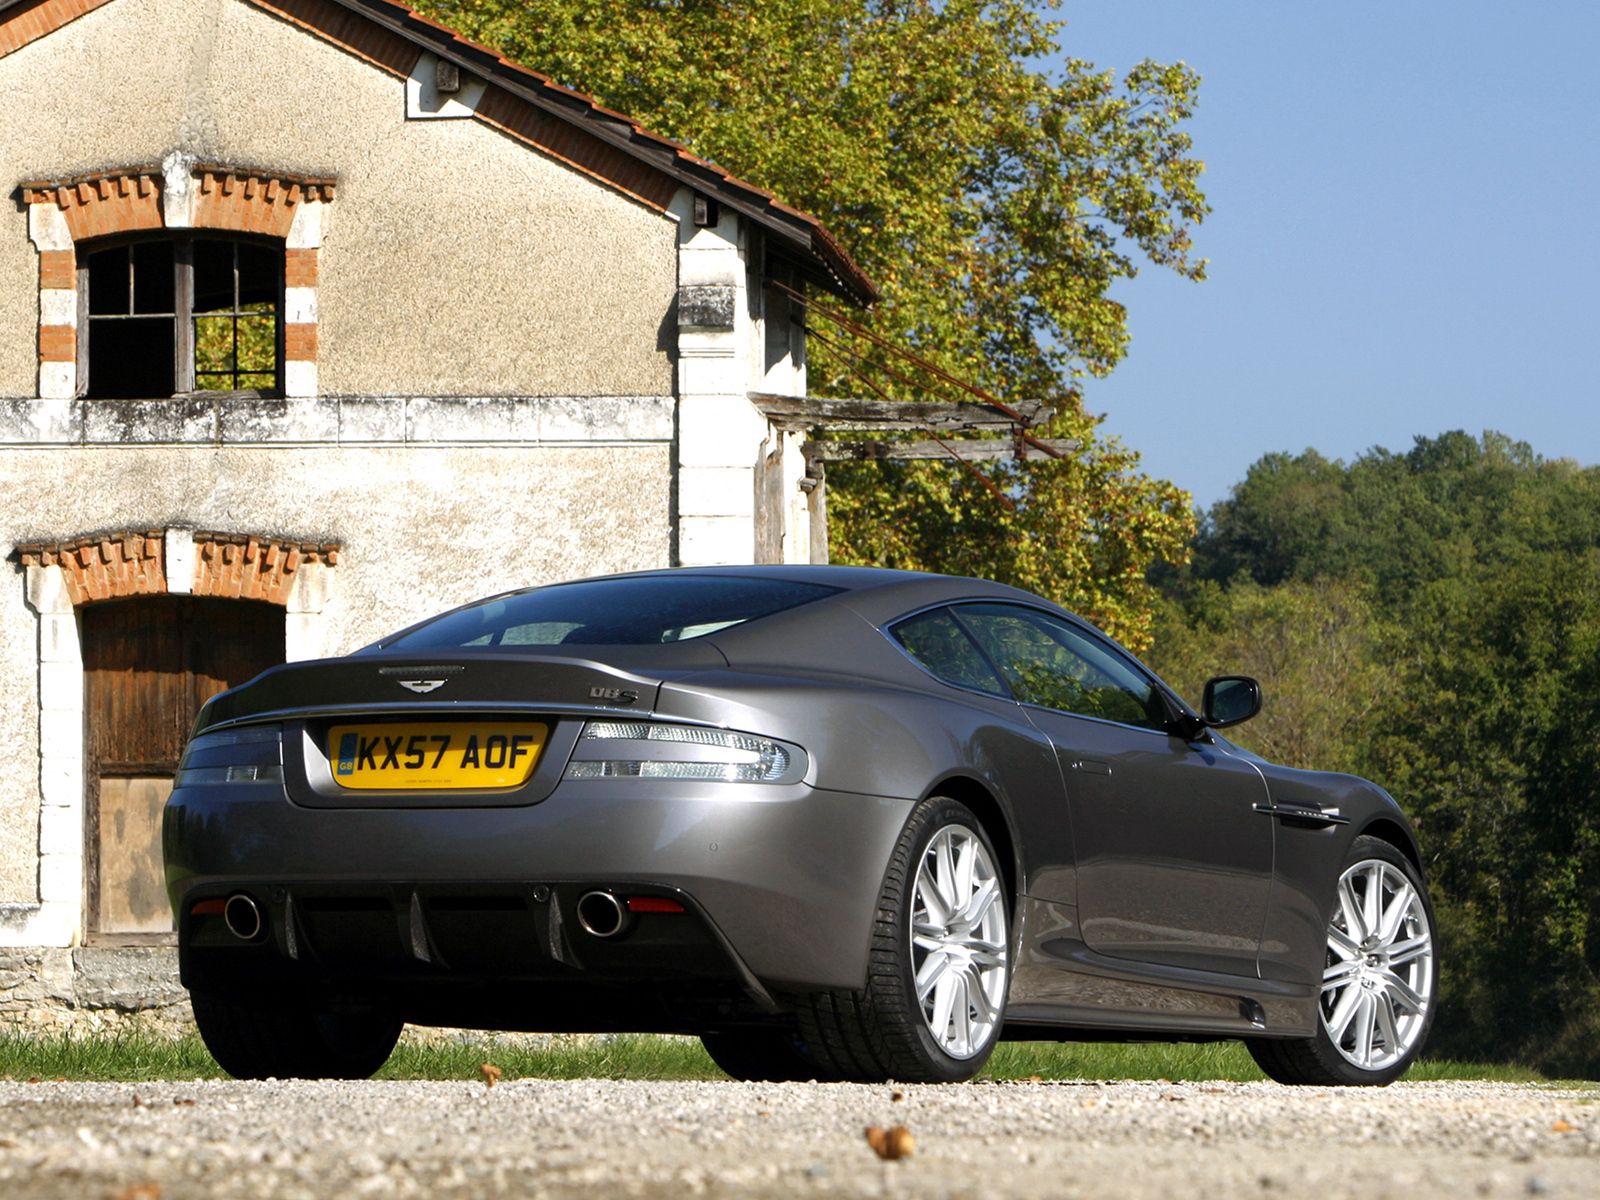 cars, auto, trees, aston martin, house, grey, back view, rear view, dbs, 2008